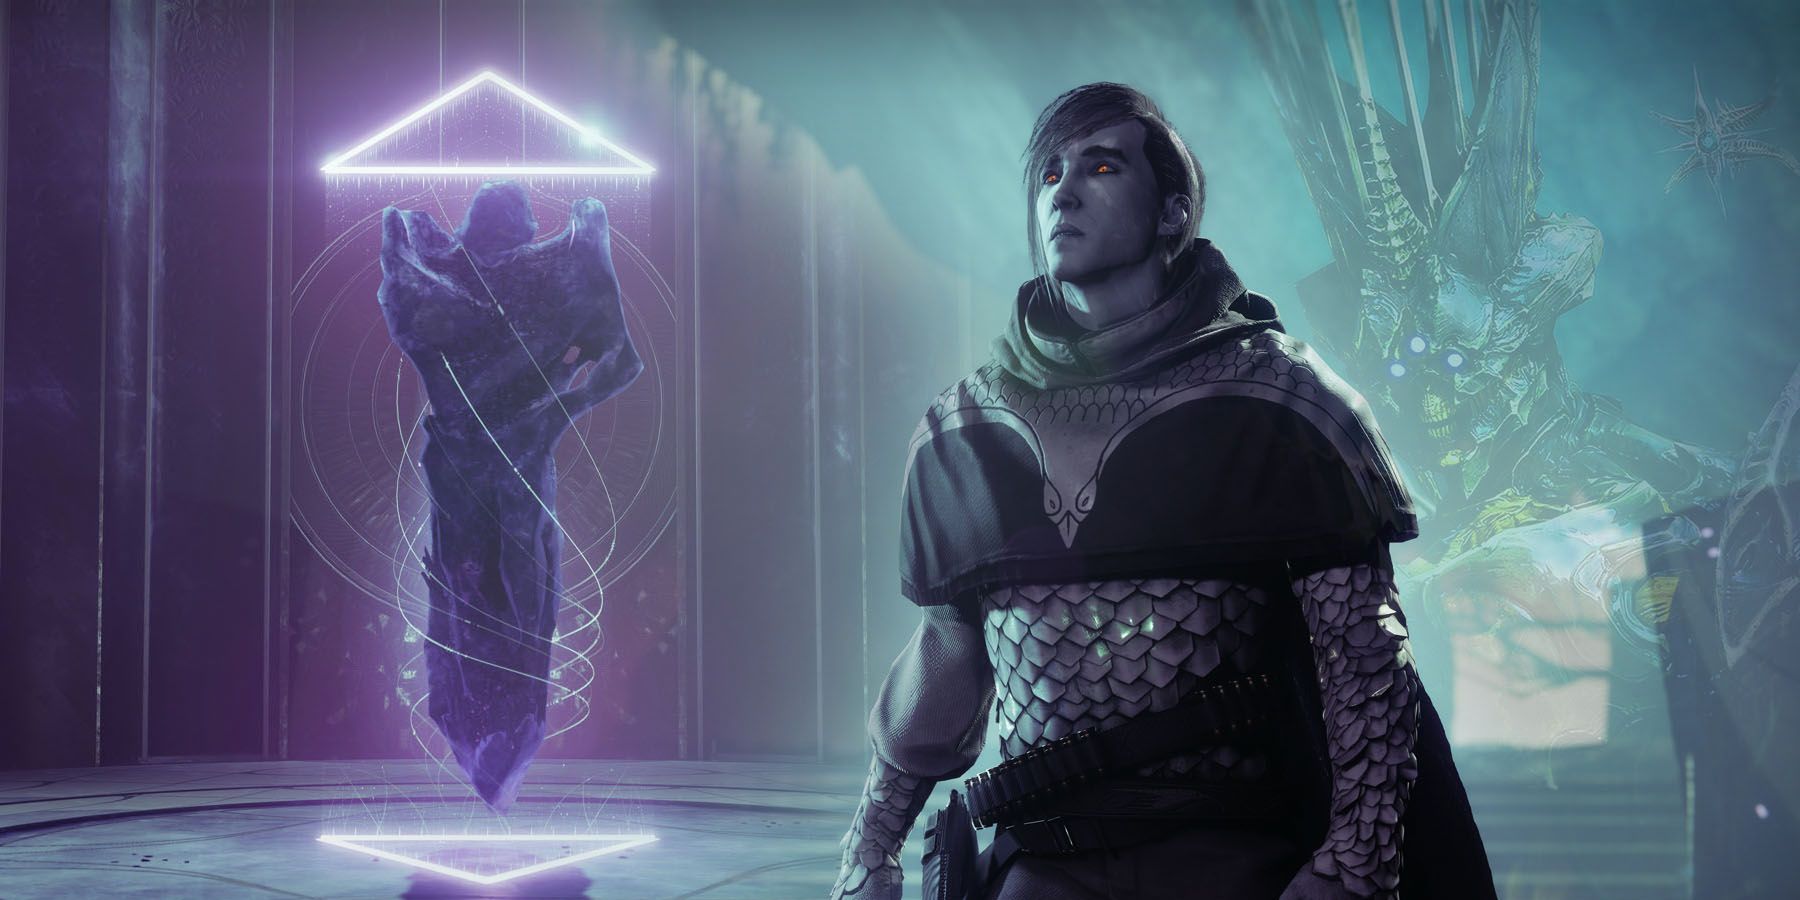 Crow from Destiny 2 with Savathun in her Crystal chrysalis prison from Season of the Lost on the left and Savathun as she looks in the Witch Queen looking over his shoulder from the right side of the image.